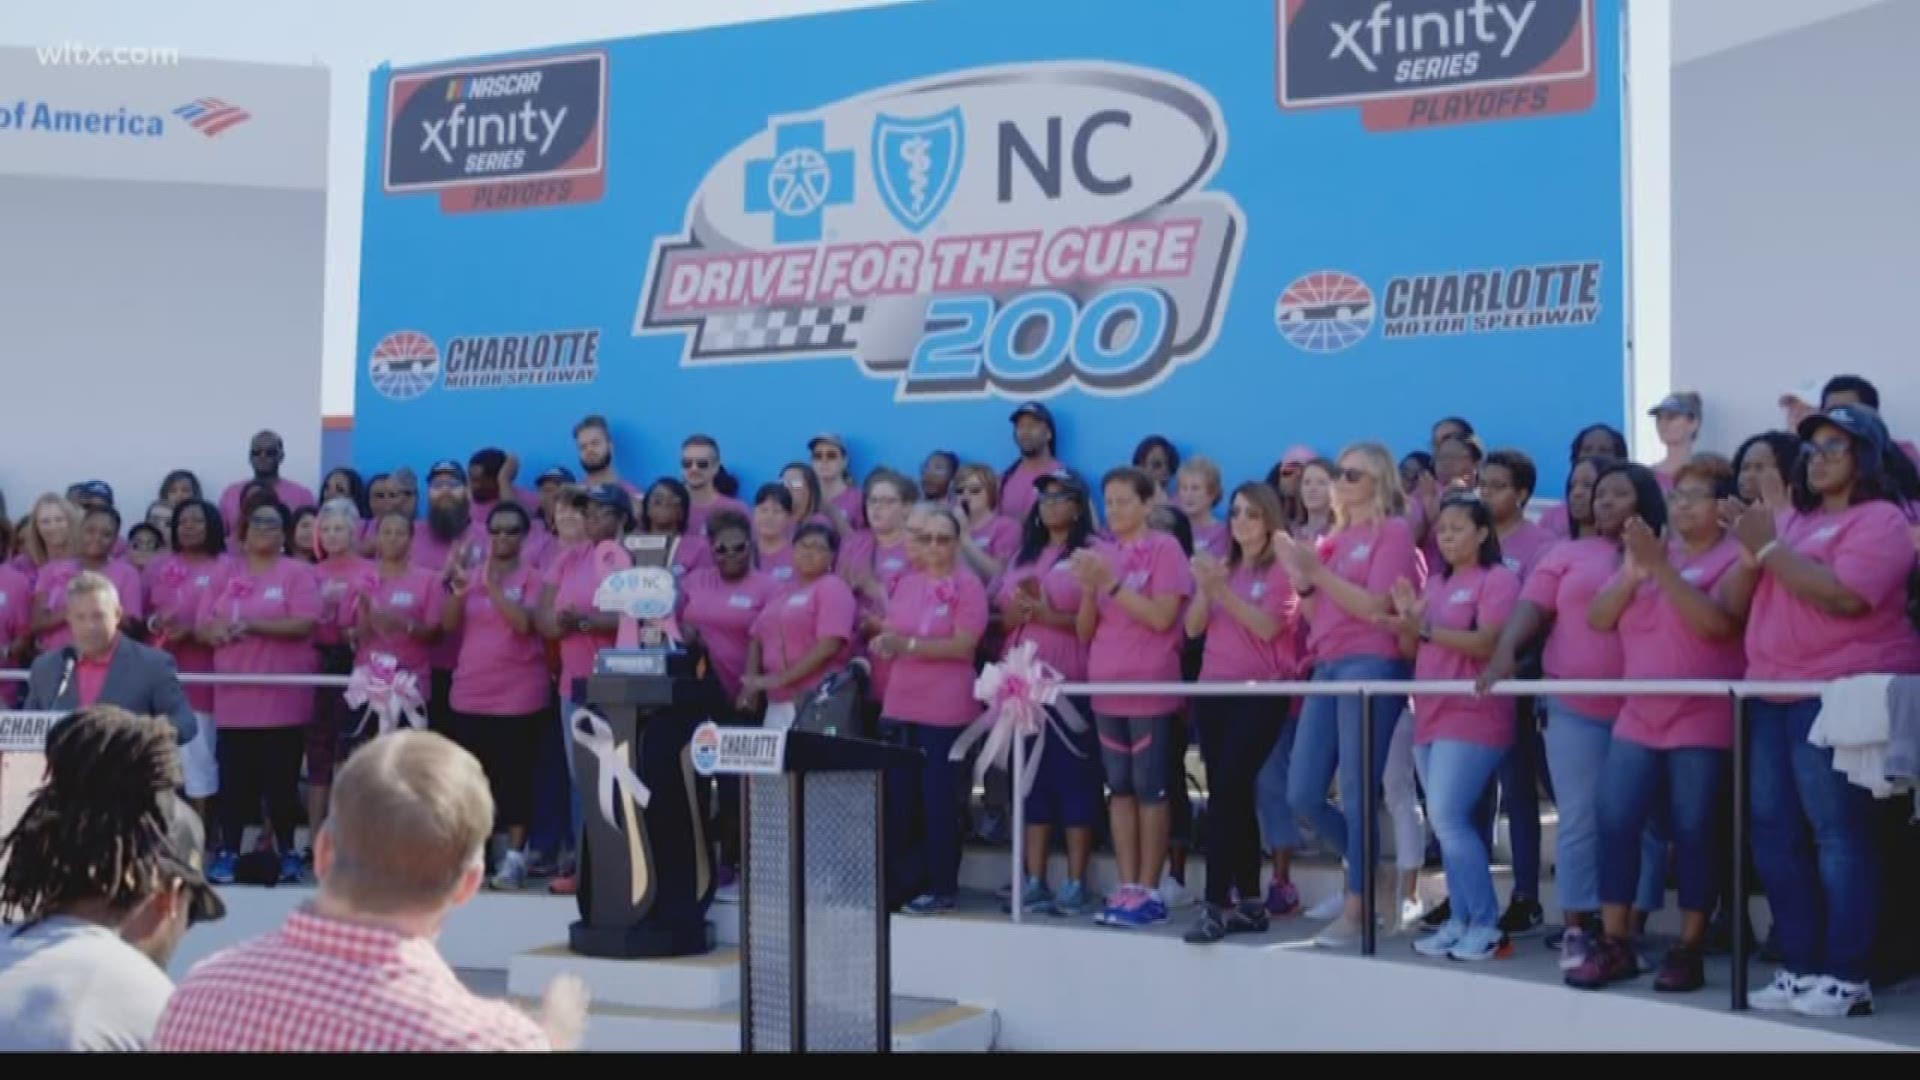 A host of breast cancer survivors were at the Charlotte Motor Speedway for a great event leading up to next week's race weekend at the track.